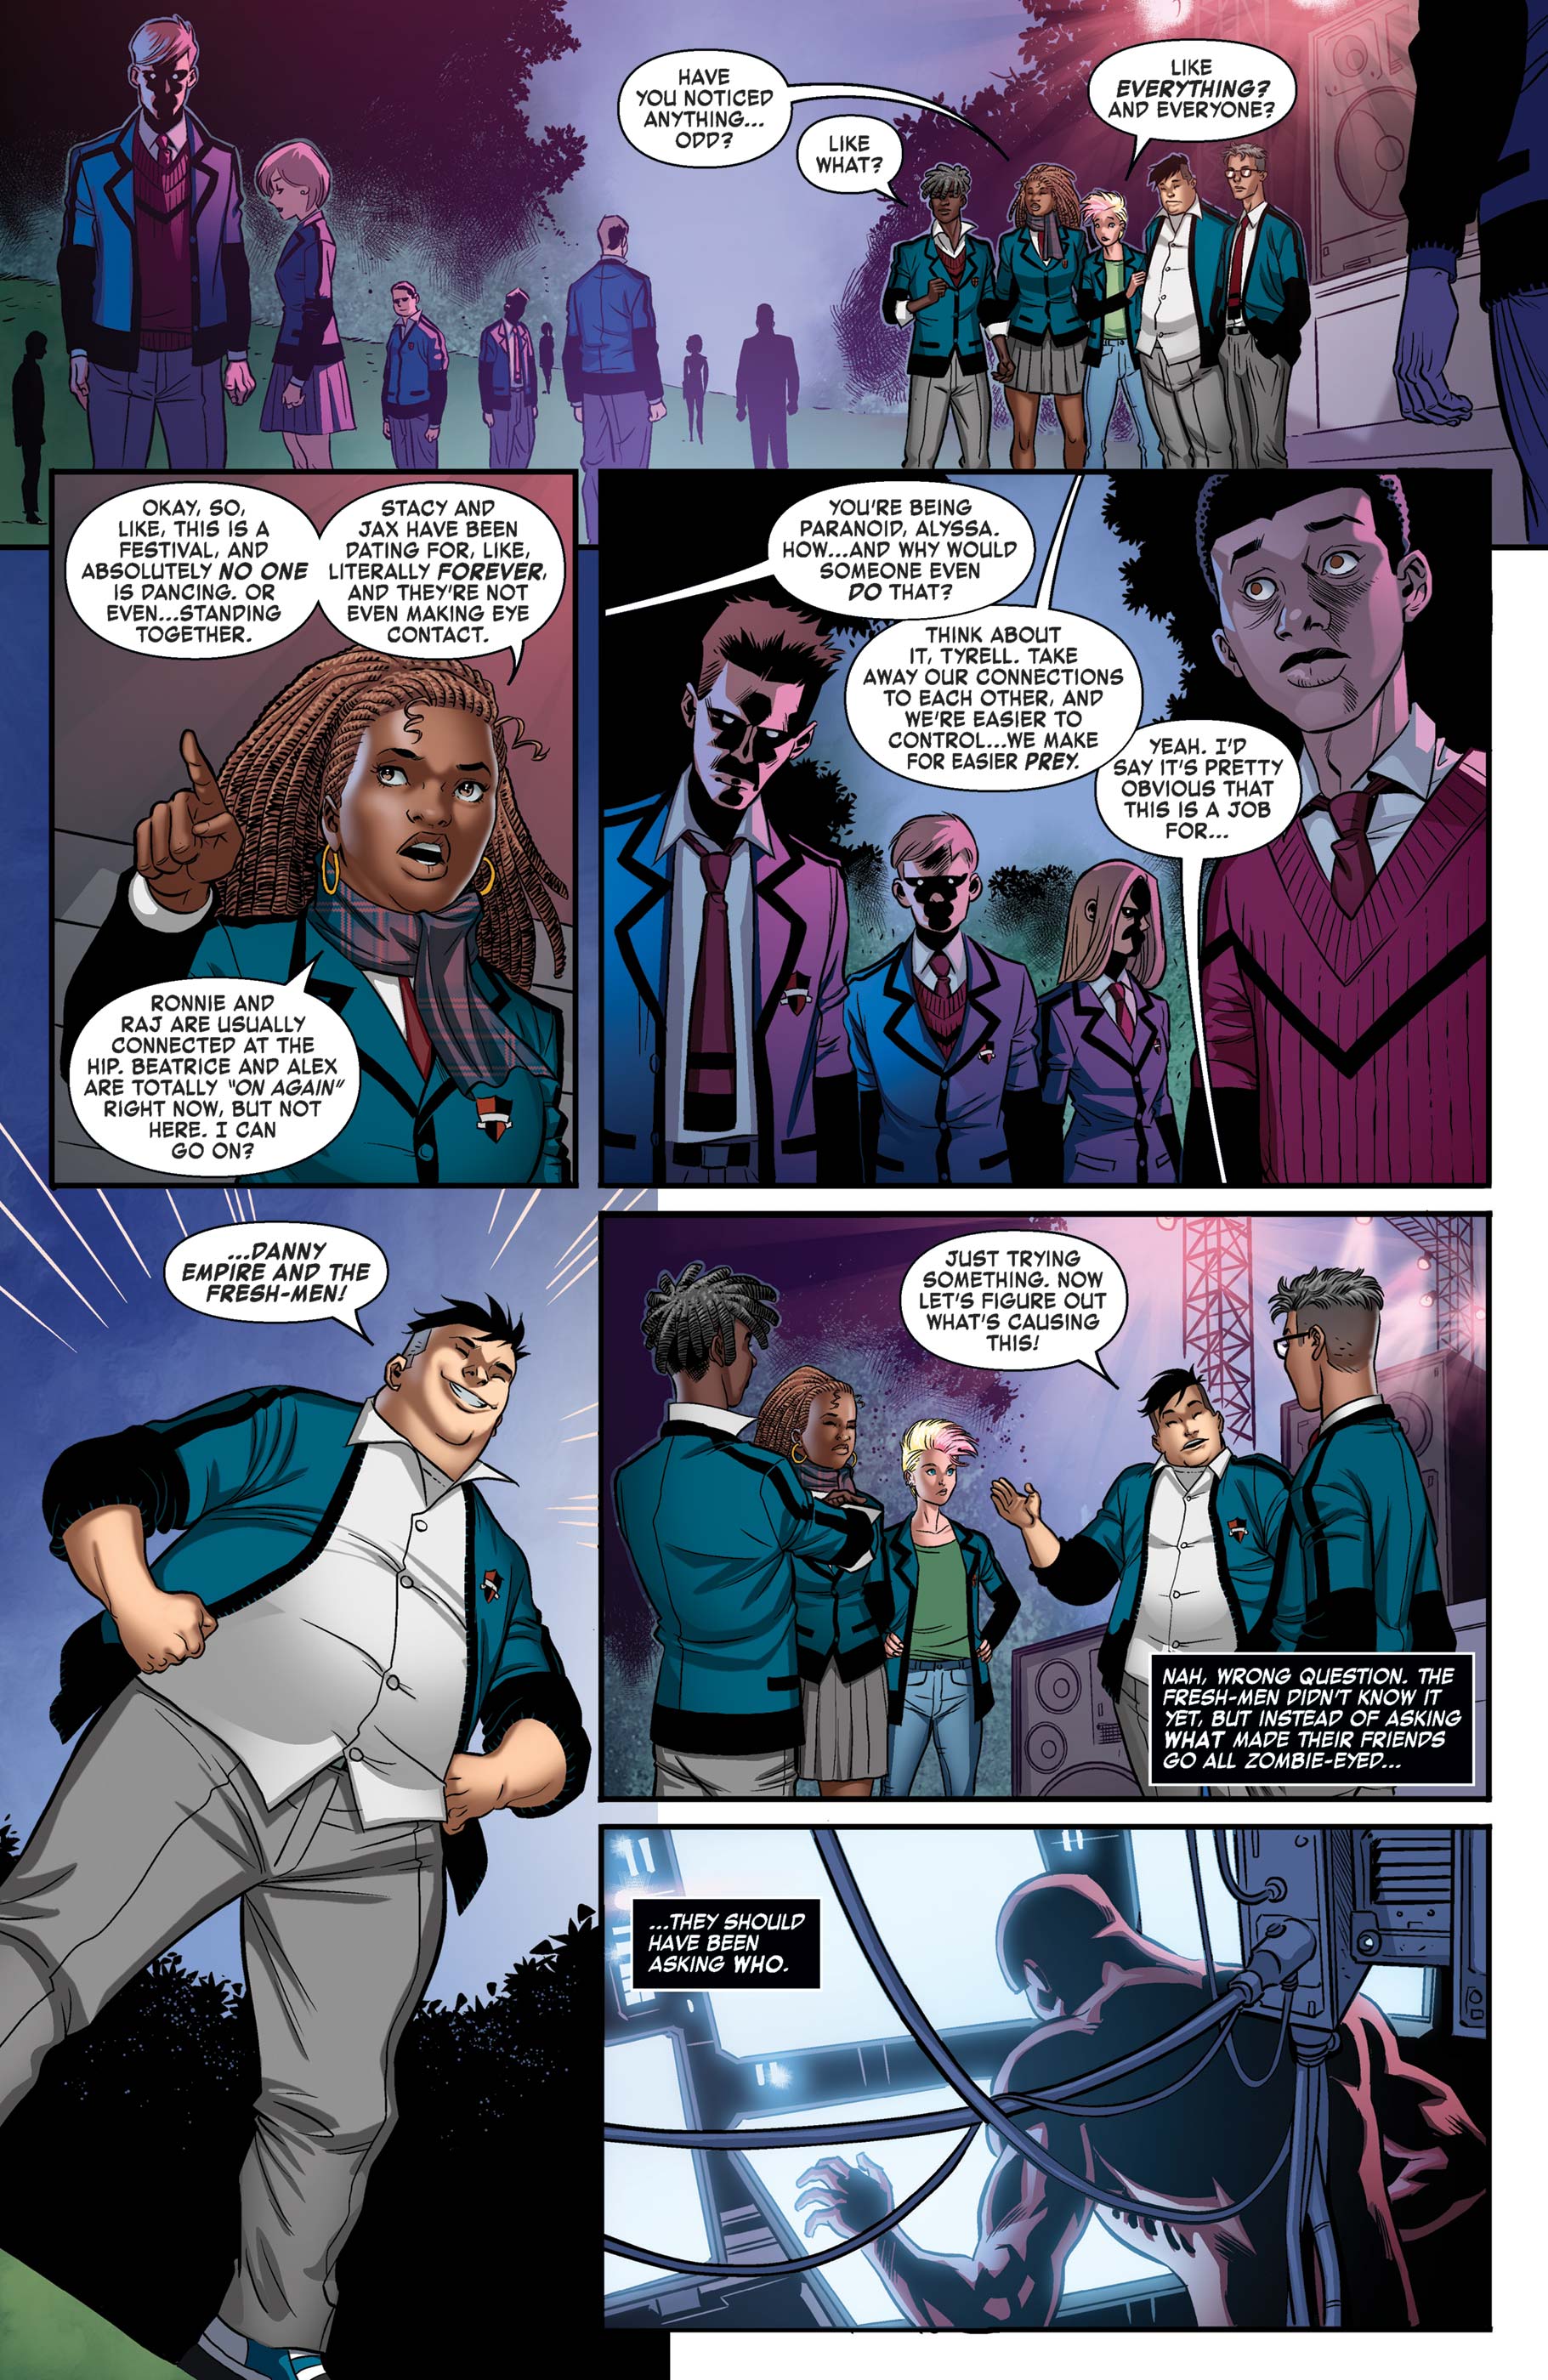 AXE: The Freshmen Issue Featuring The Avengers Full Page 5